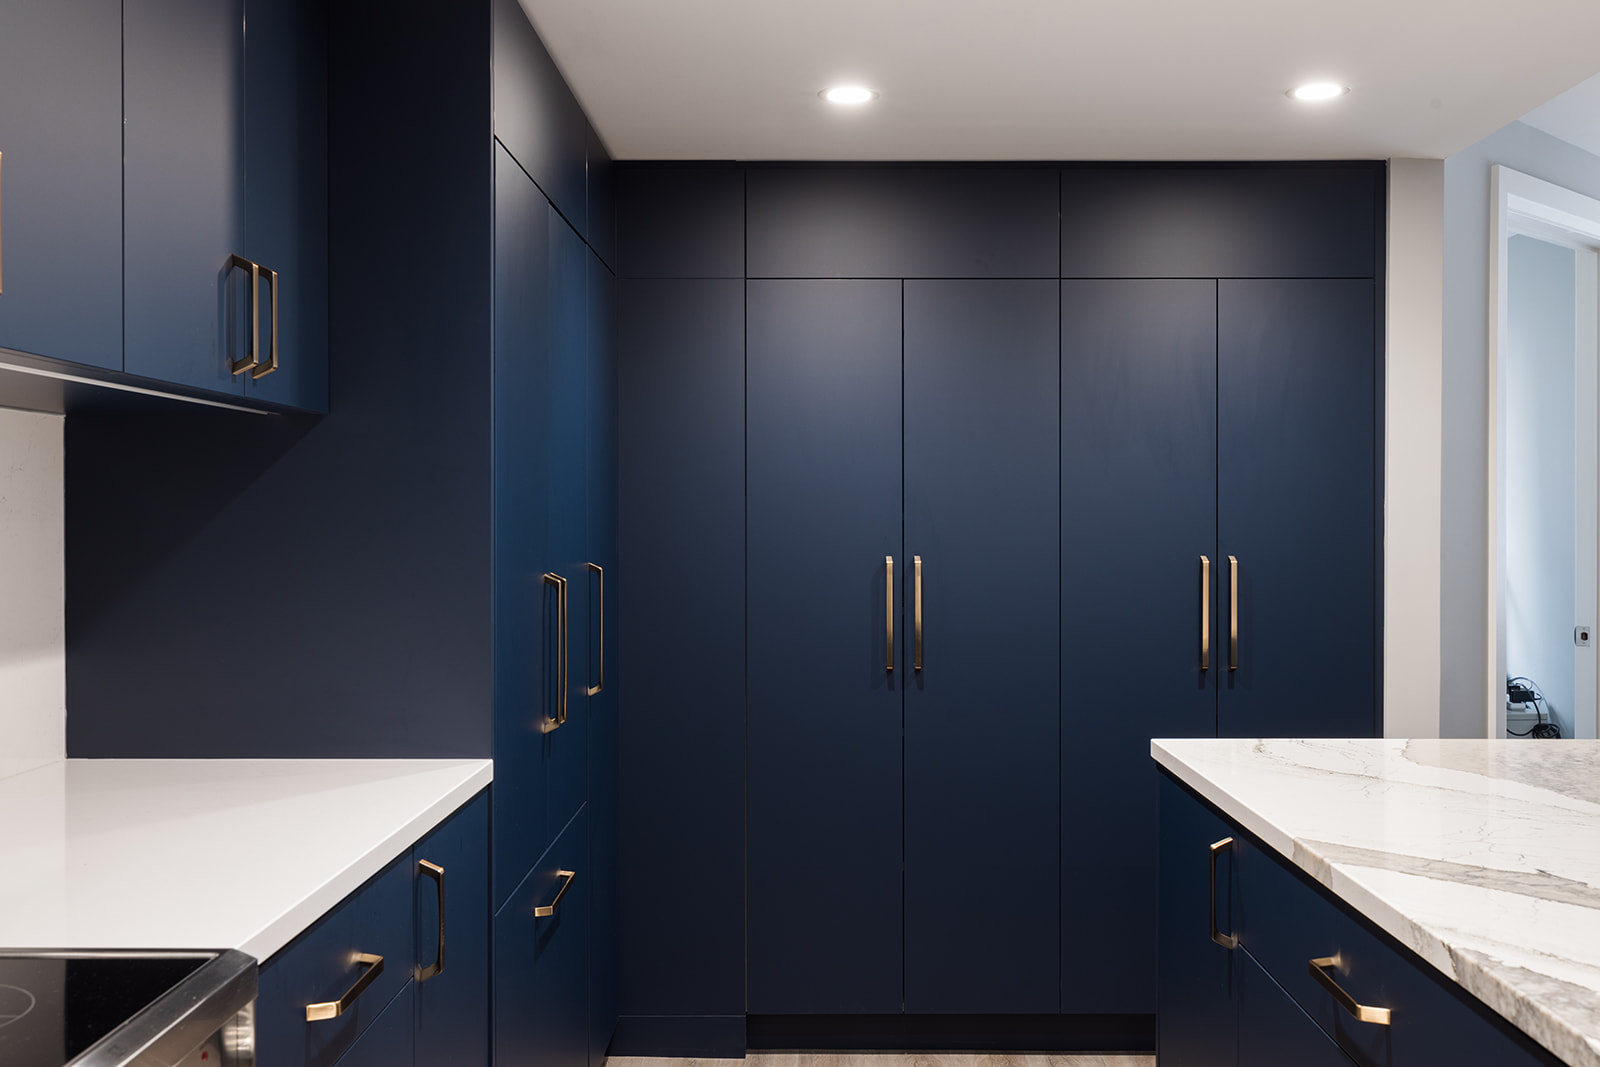 Floor-to-ceiling dark blue flat panel cabinets in downtown Toronto luxury condo kitchen renovation